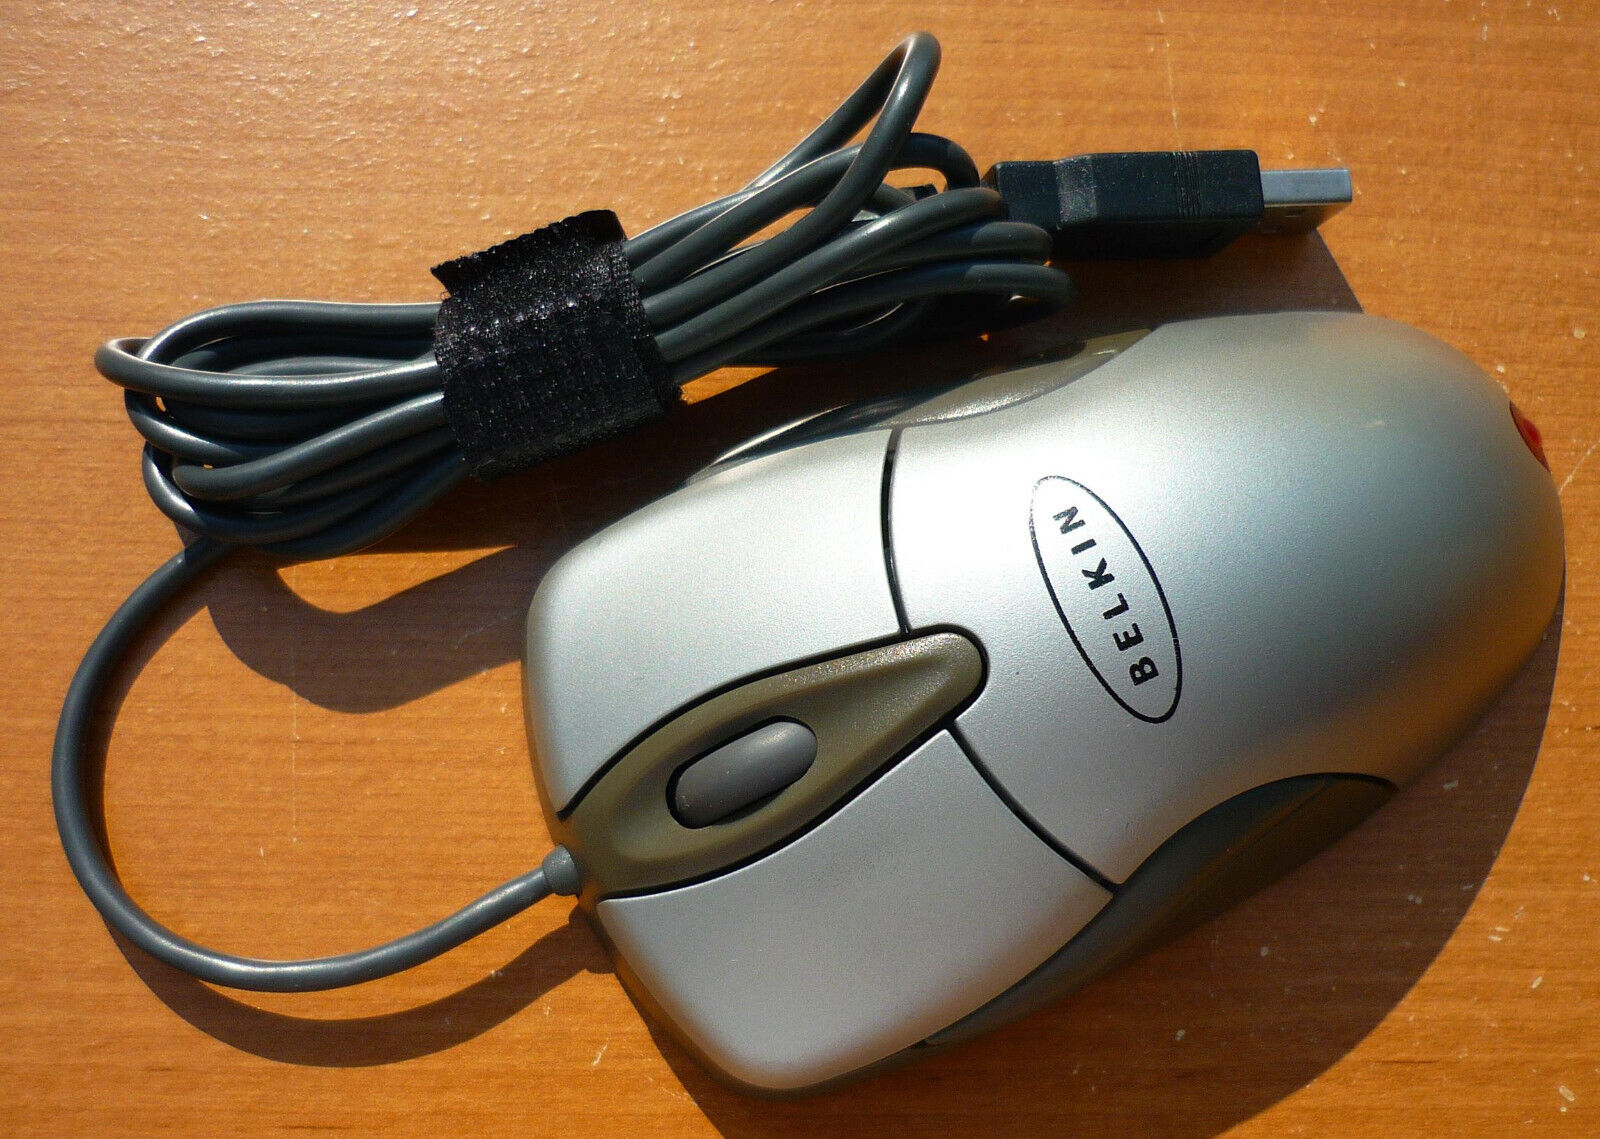 Belkin 5-Button Optical Mouse w/Scroll Wheel USB Wired (F8E850-OPT)